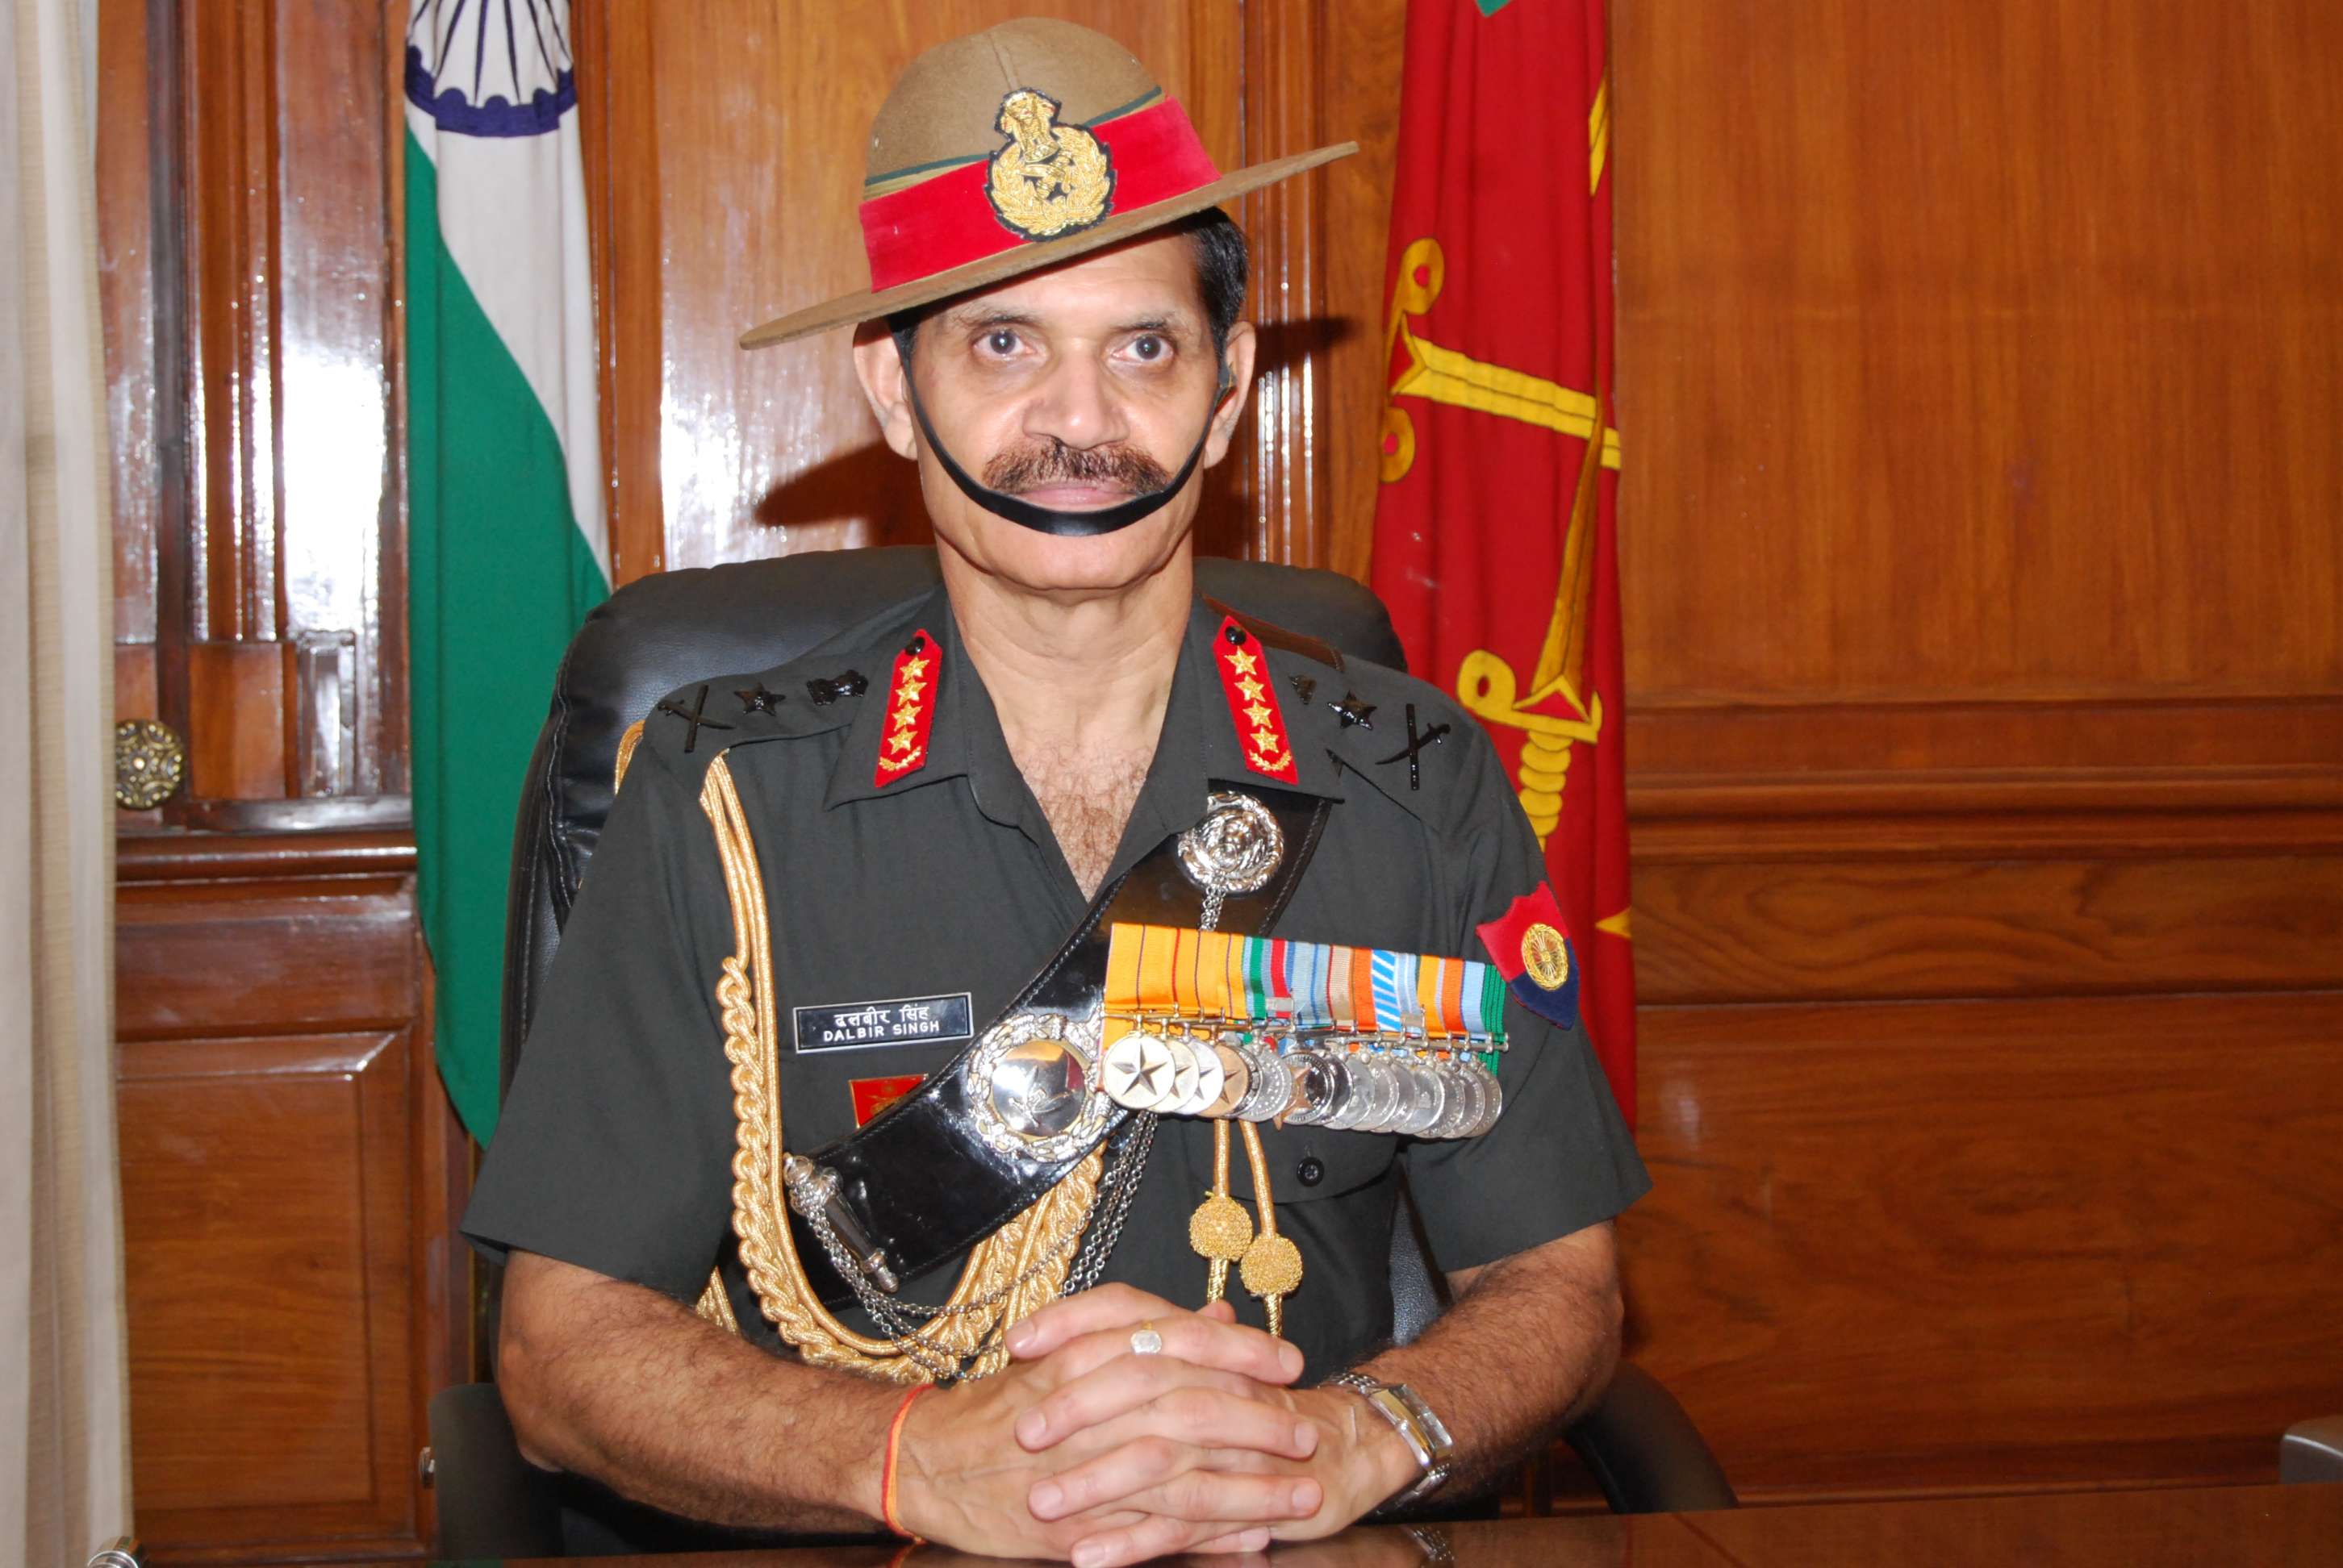 Indian Army Prepared To Meet Any Challenges: Gen Dalbir Singh Suhag